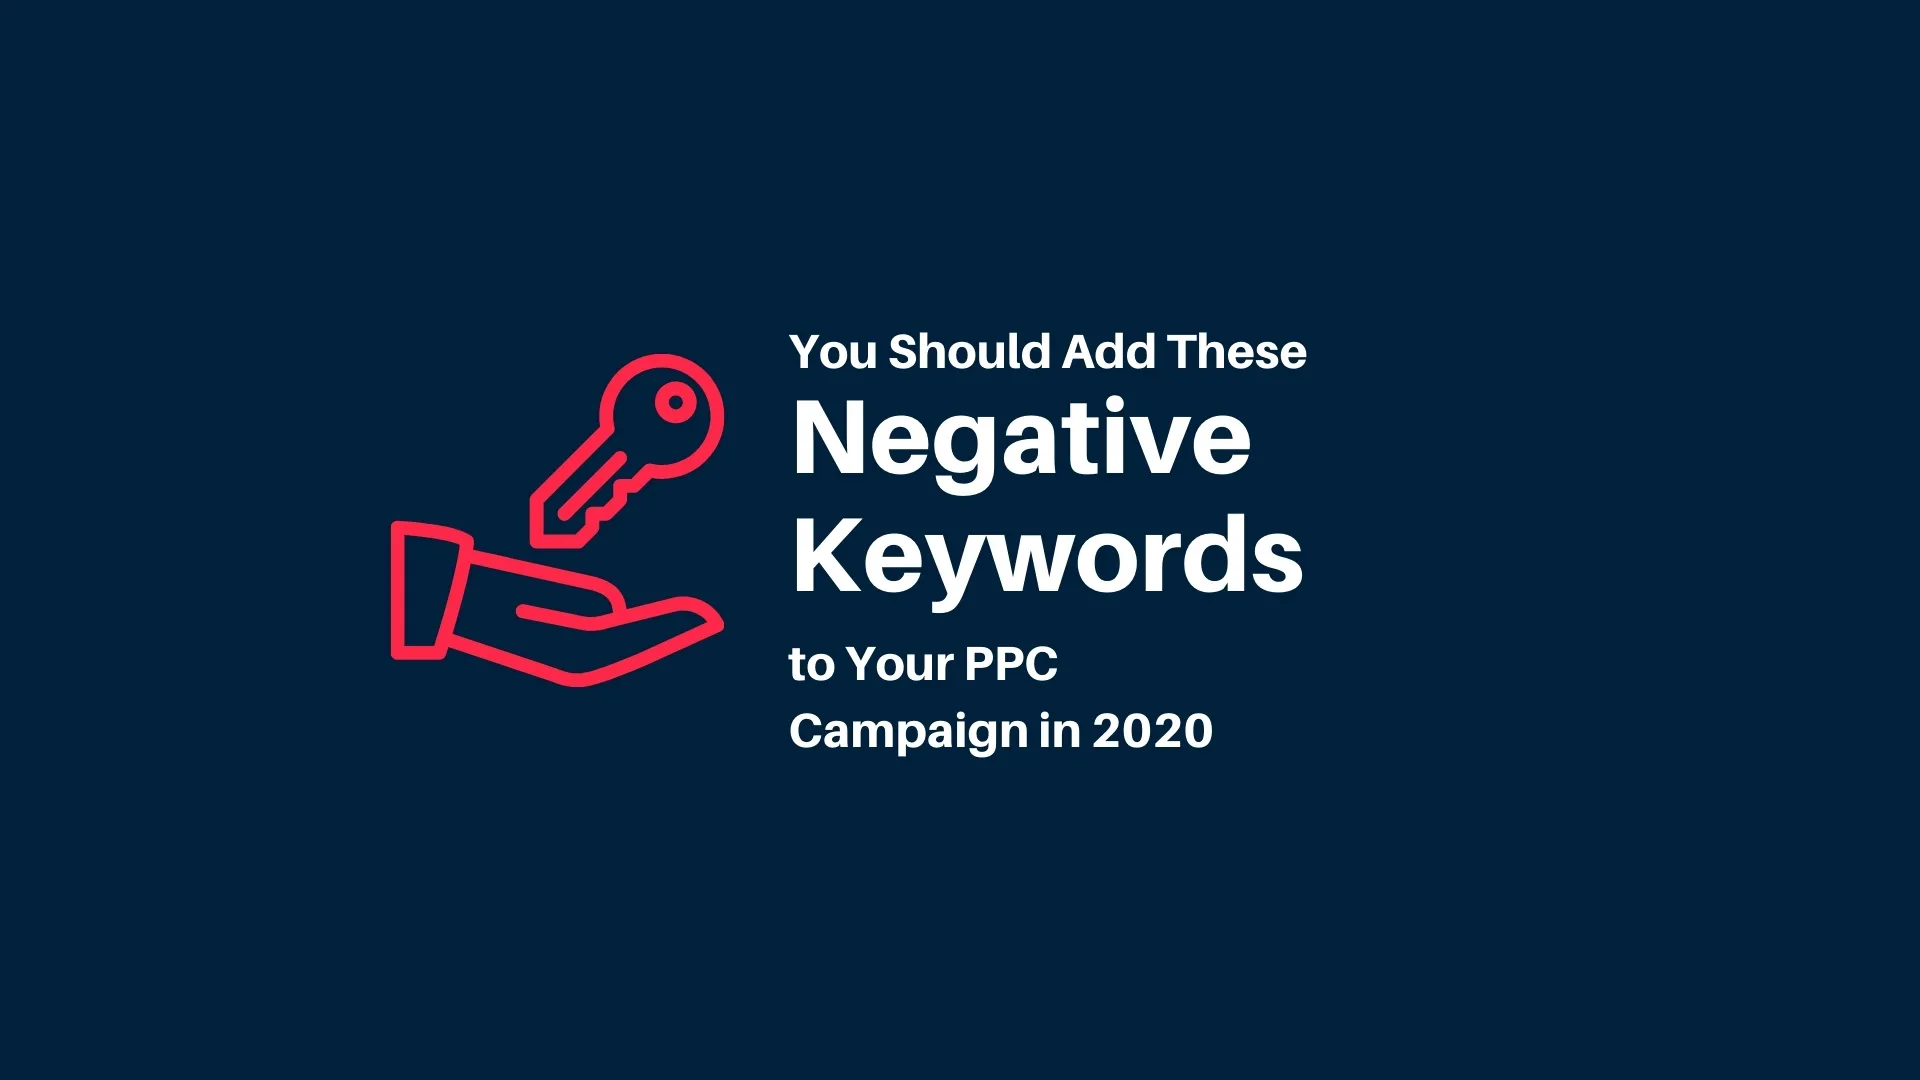 You Should Add These Negative Keywords to Your PPC Campaign in 2020